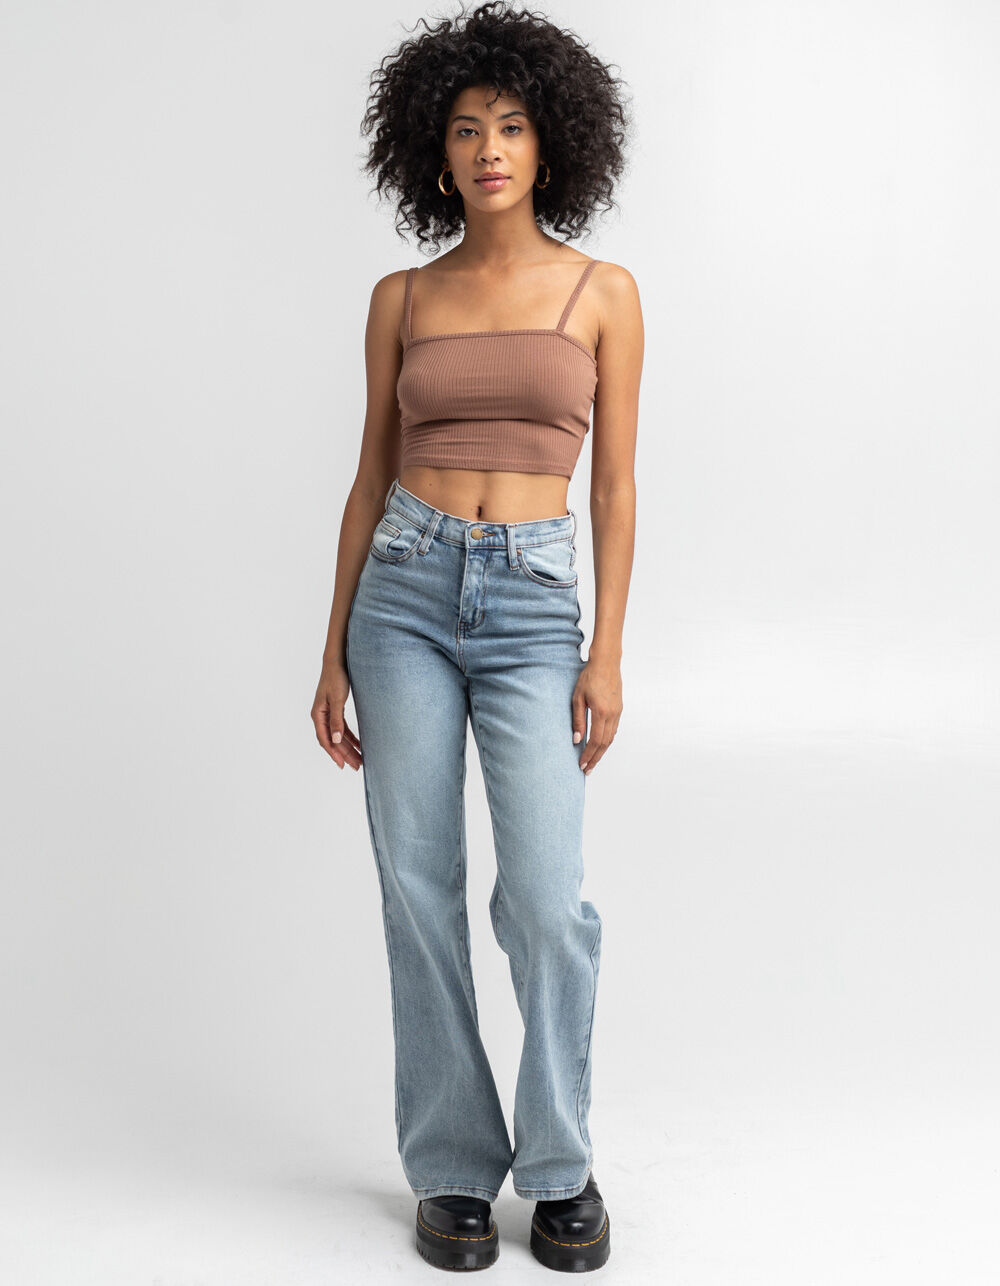 BOZZOLO Square Neck Rib Womens Crop Top - 434 | Tillys